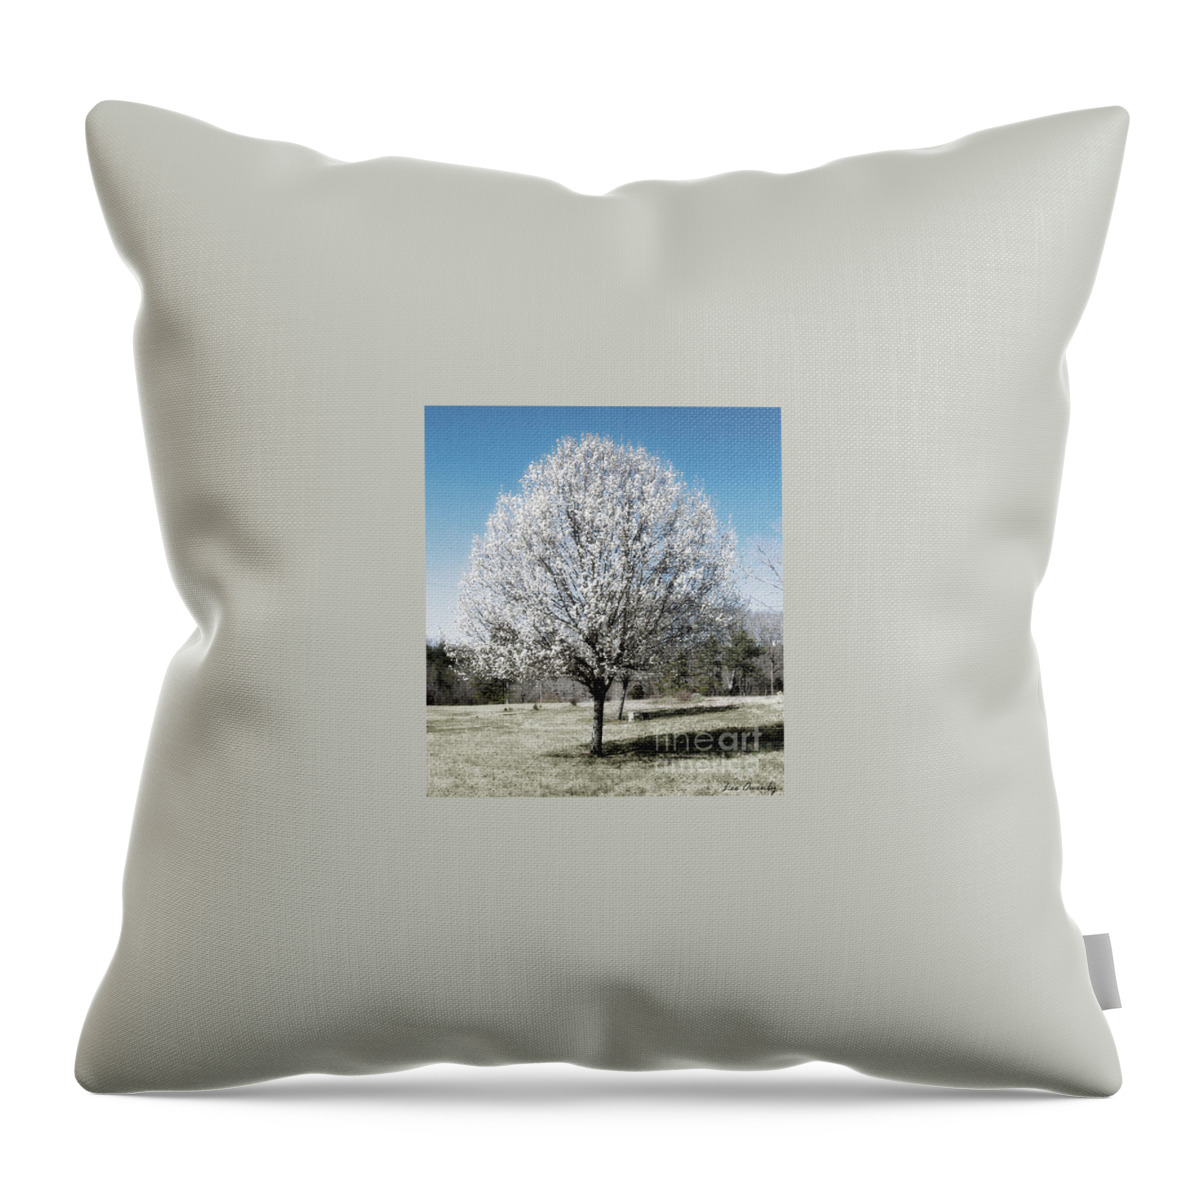 Bradford Pear Throw Pillow featuring the photograph Bradford Pear by Lee Owenby